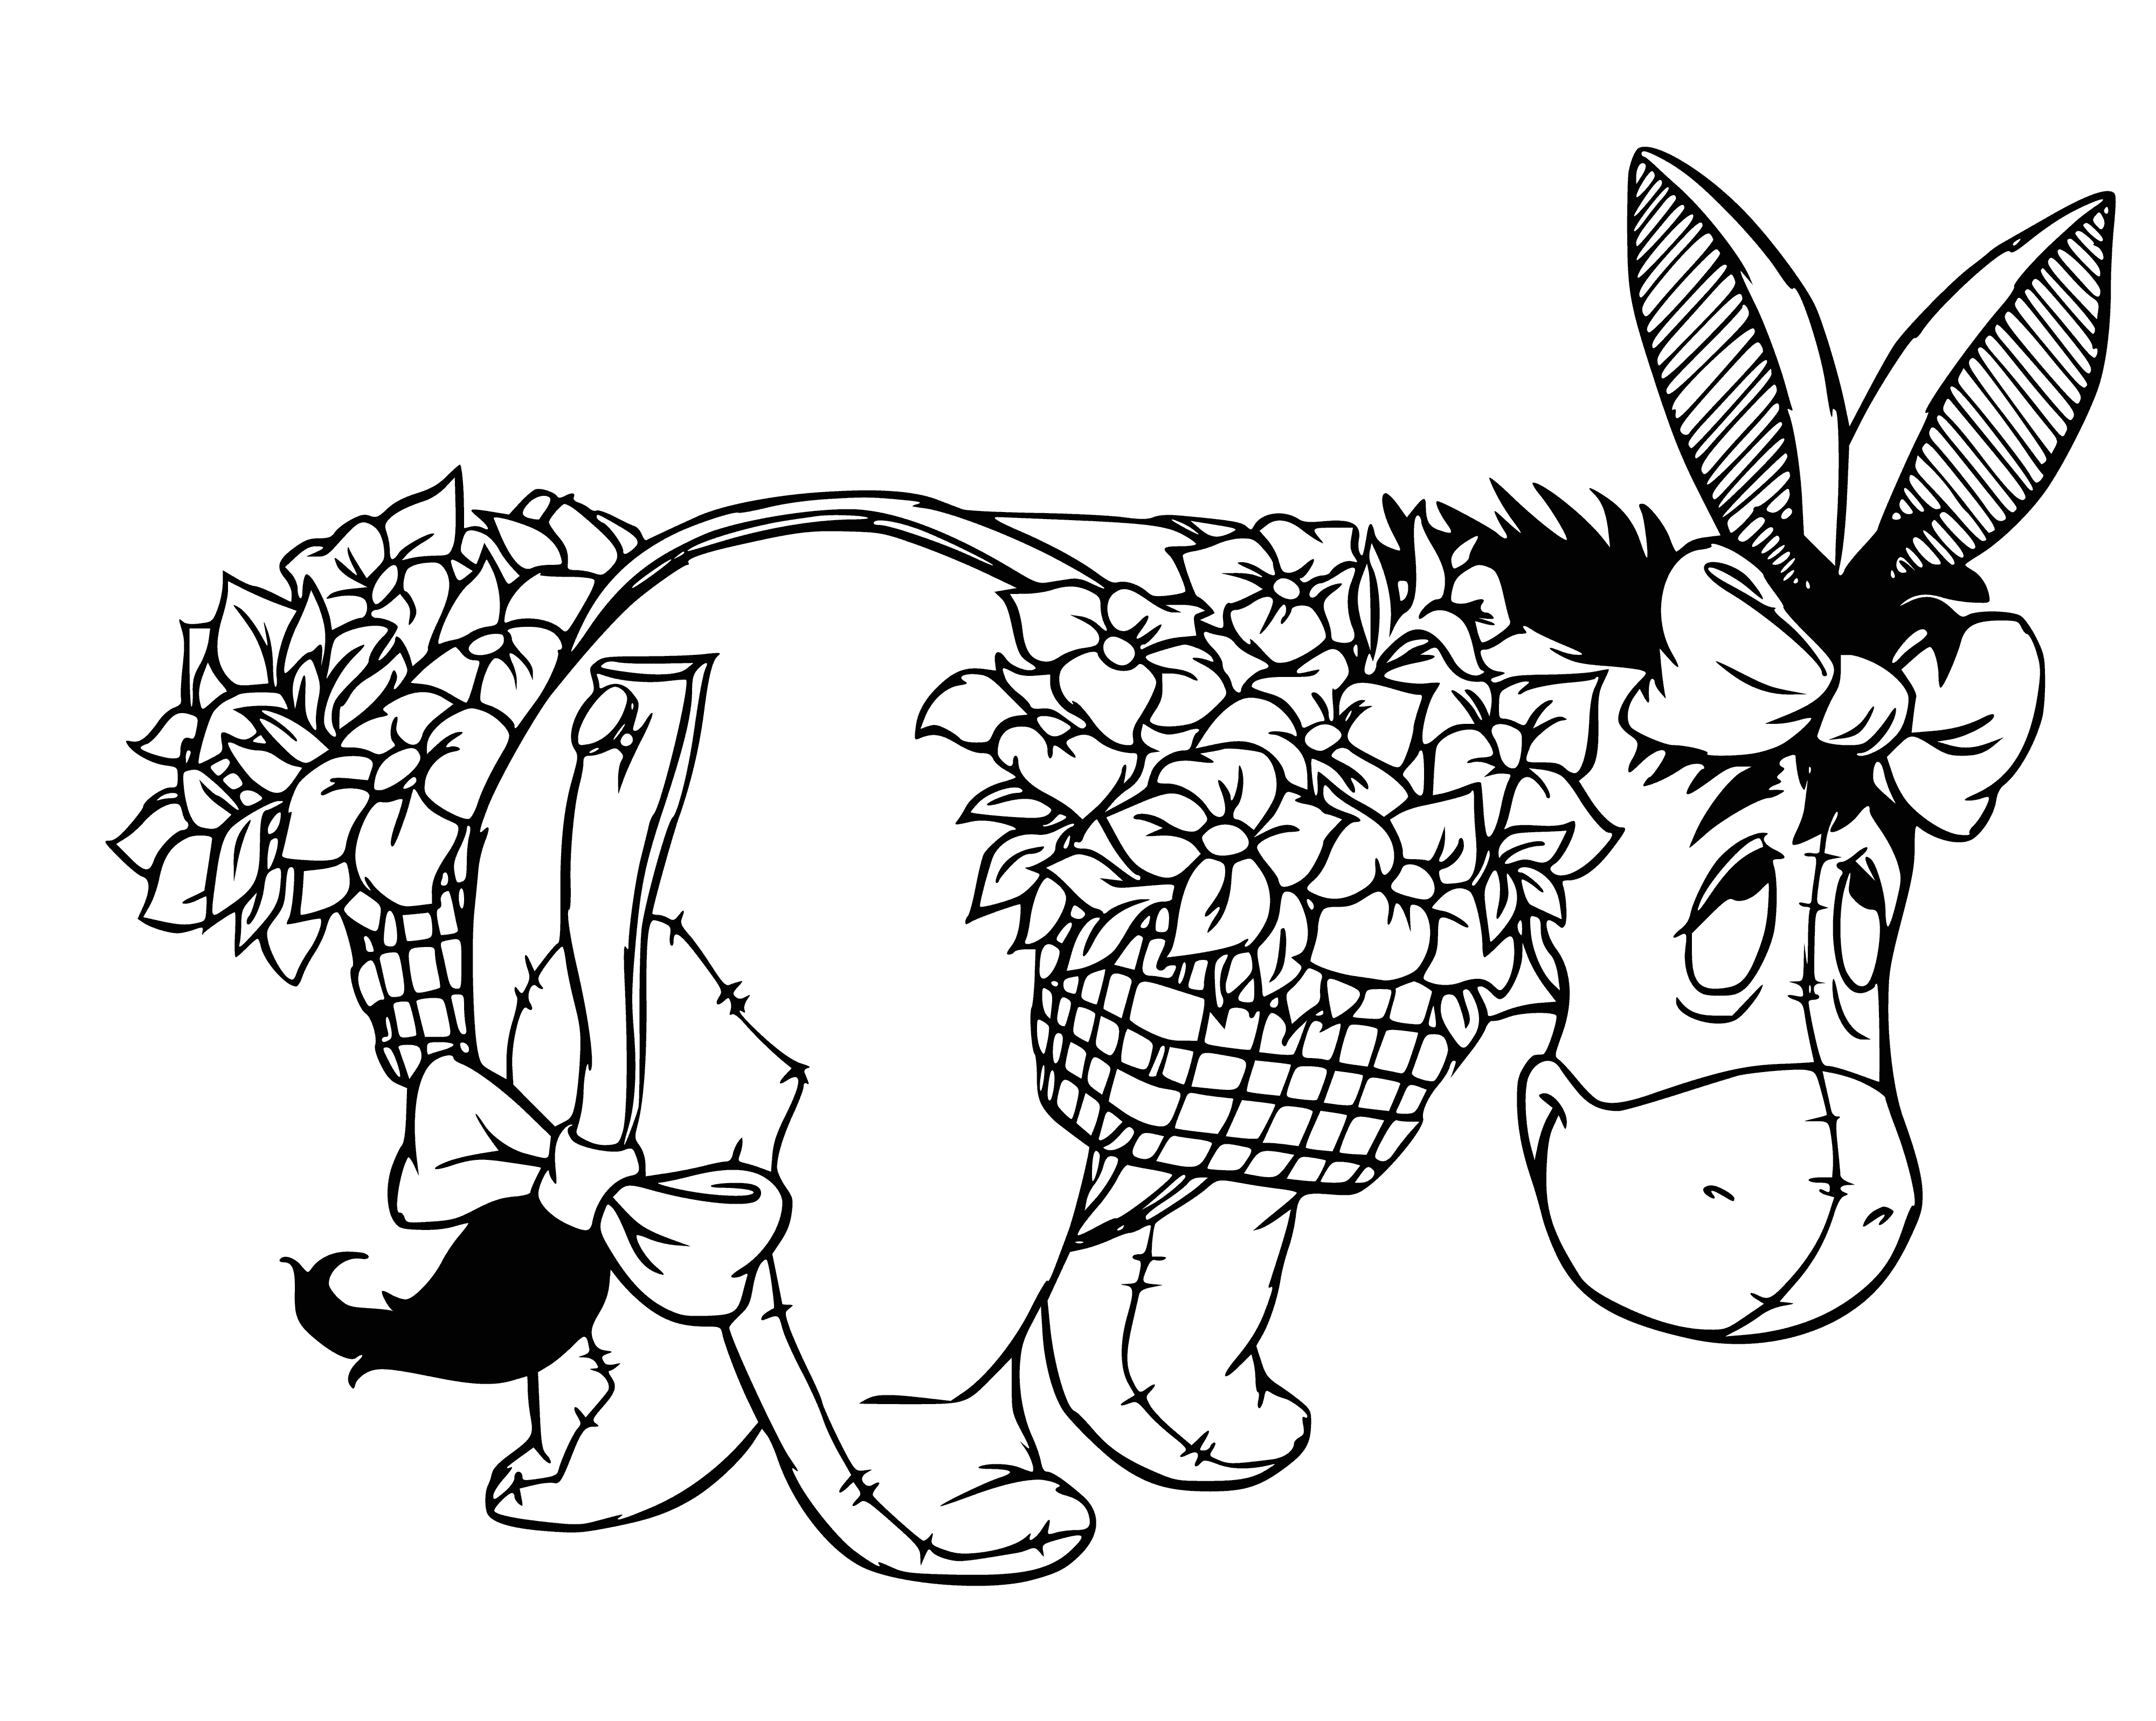 coloring page: Donkey happily eats carrots wearing Easter bunny costume: fur suit, fluffy tail, ears, pink nose and grass.